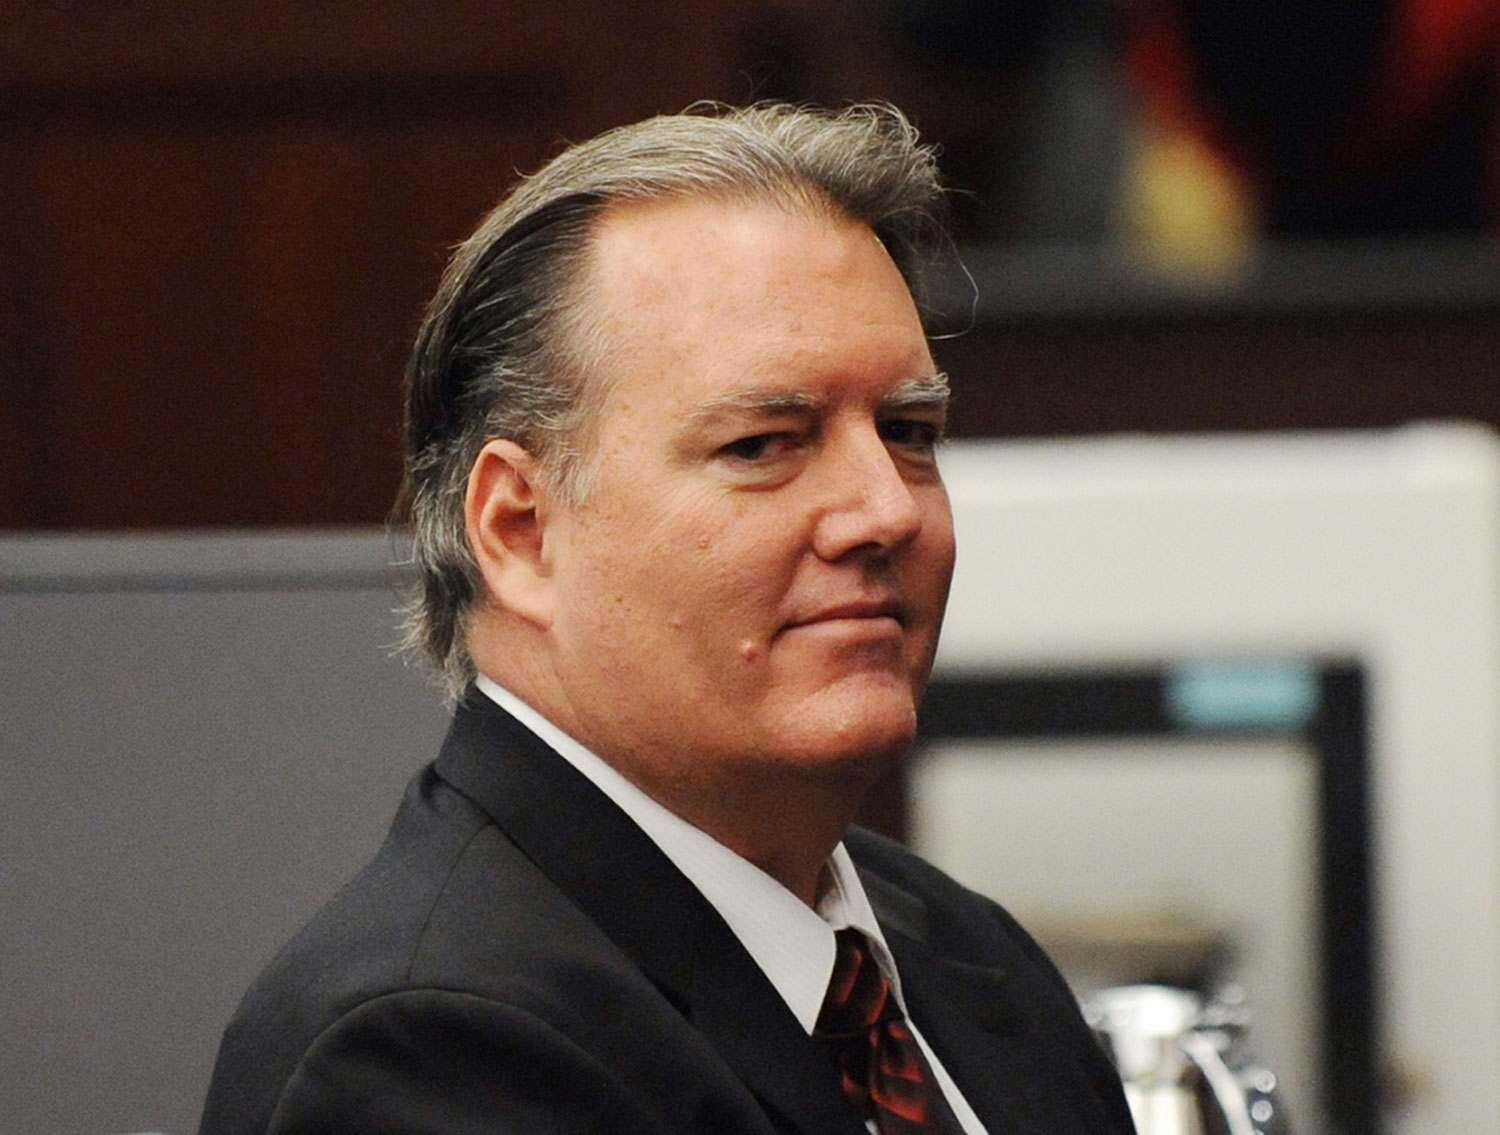 Michael Dunn Was Found Guilty—but That’s Not Enough to Ensure Justice